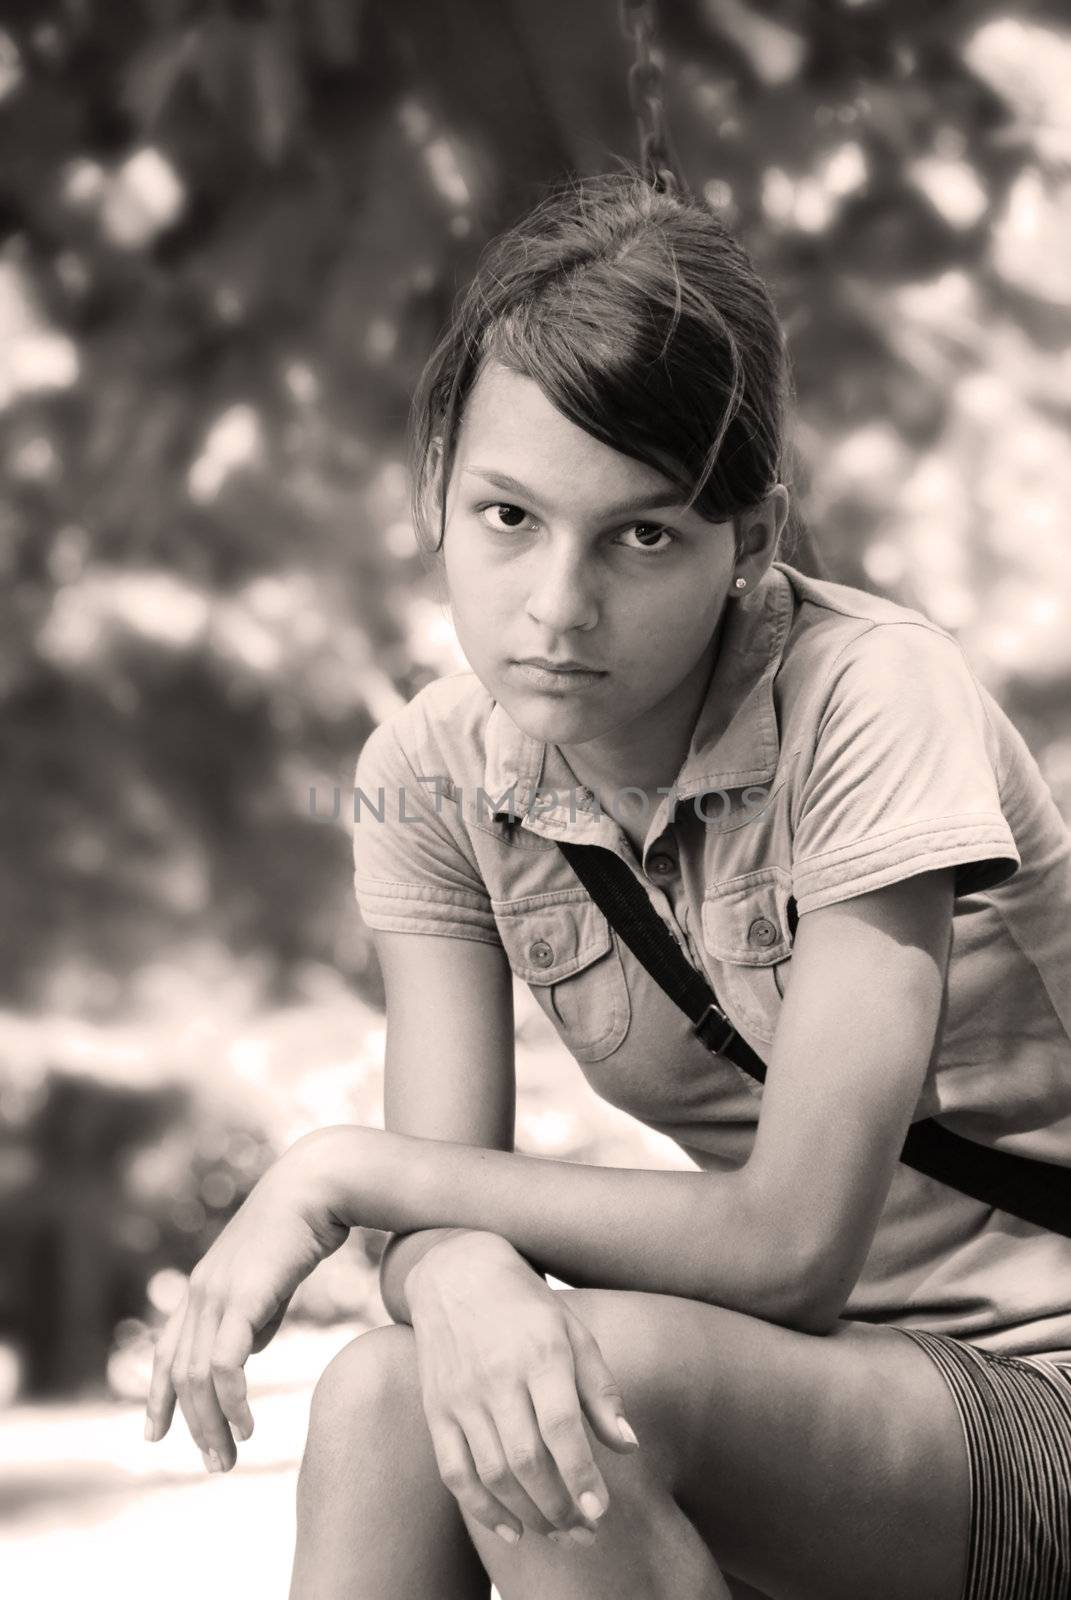 teenage girl portrait sitting outdoor in black and white